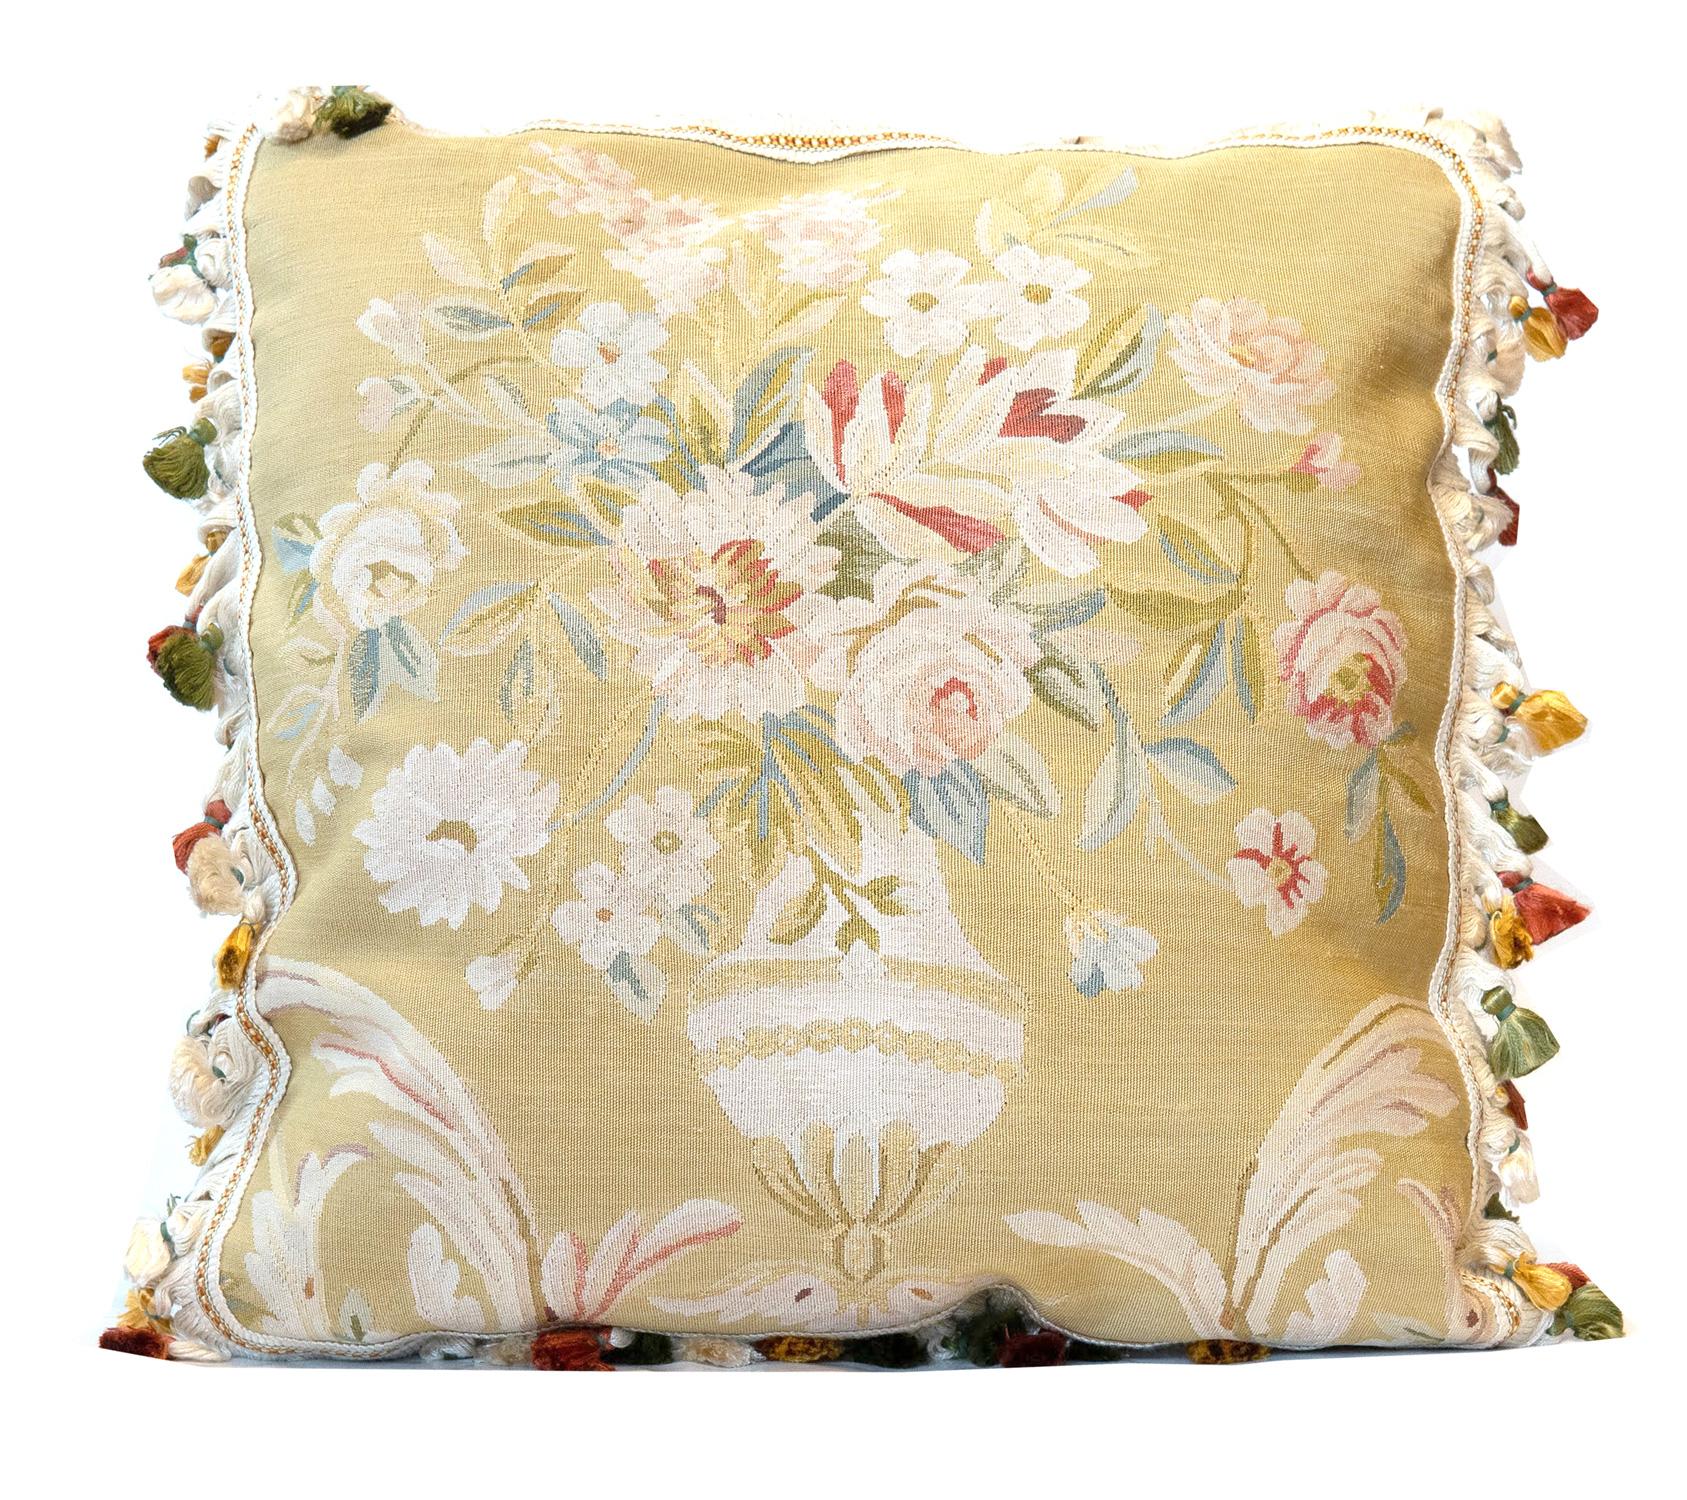 Chinese Vintage Pure Silk Cushion Covers Pair of Handmade Floral Aubusson Pillows Cases For Sale